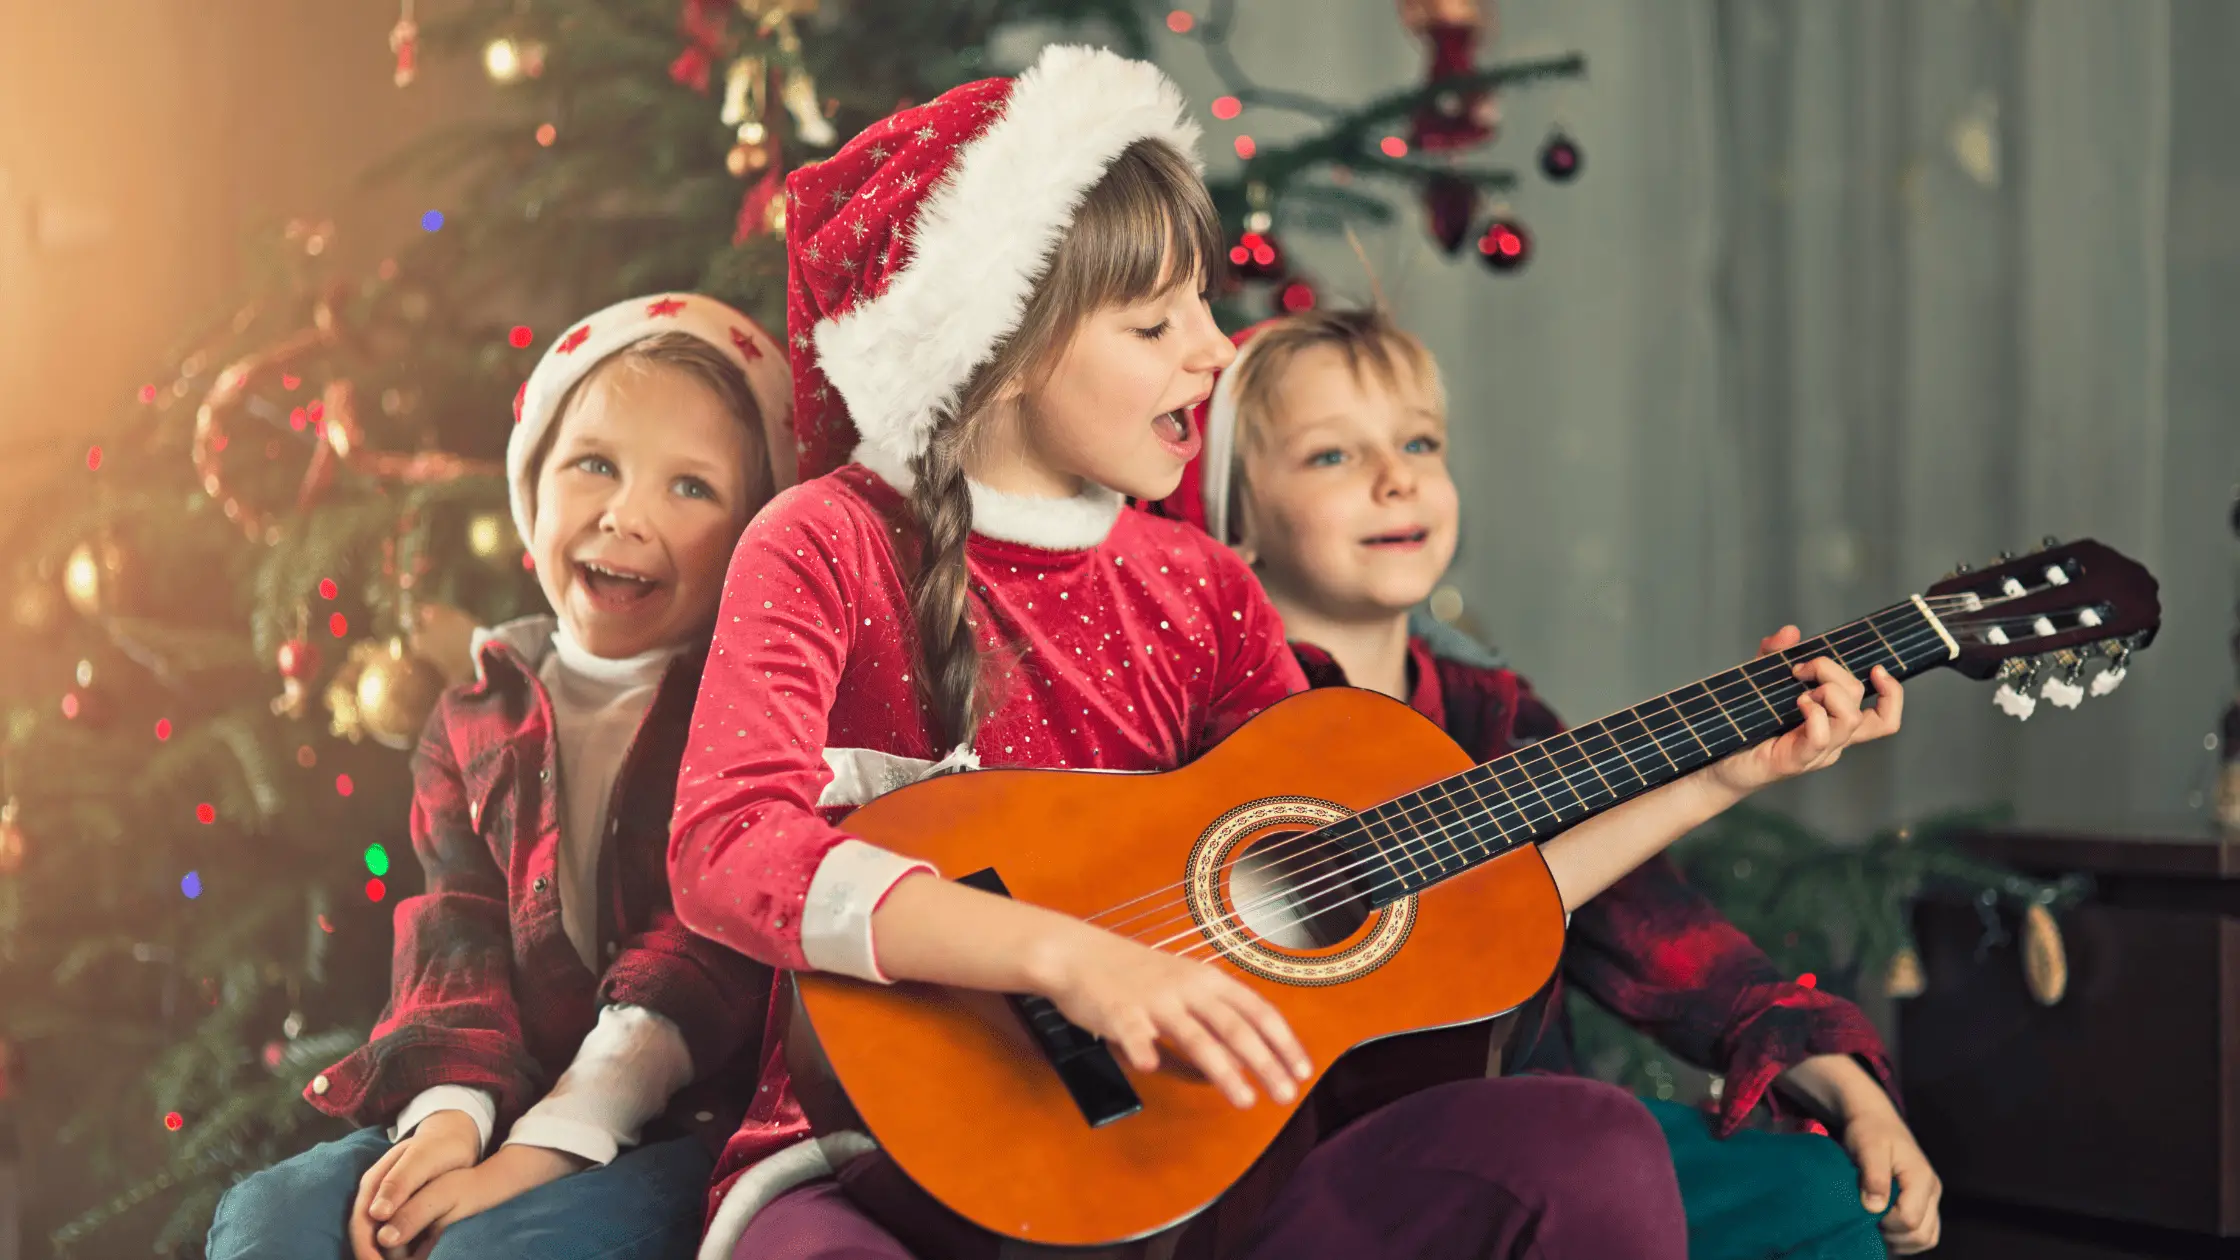 14 Best Christian Christmas Songs and Traditional Carols for Kids (with lyrics)